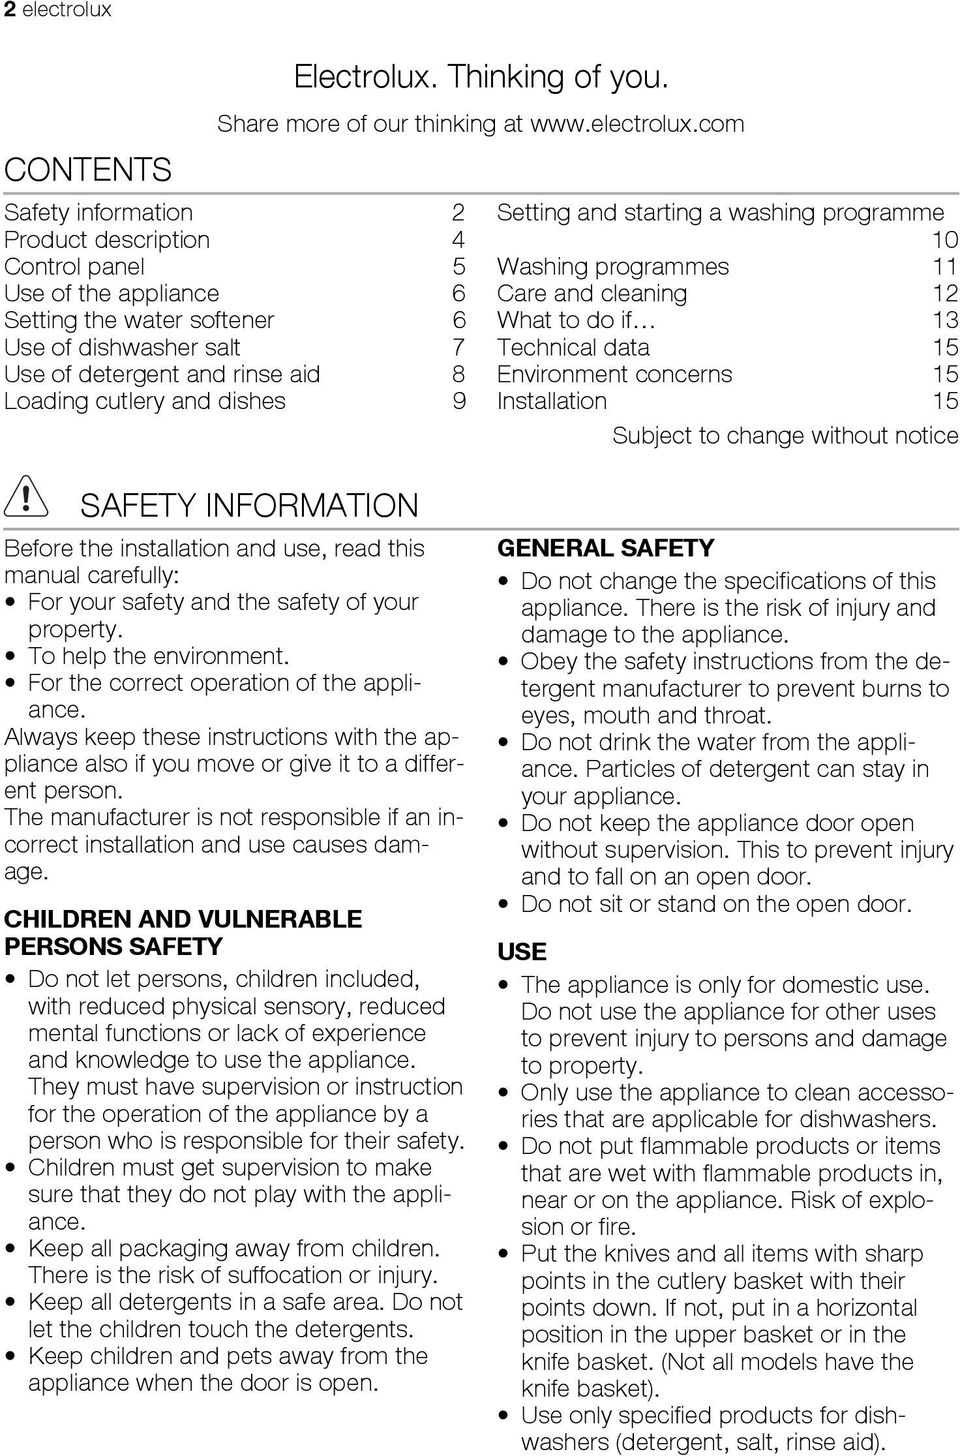 com Safety information 2 Product description 4 Control panel 5 Use of the appliance 6 Setting the water softener 6 Use of dishwasher salt 7 Use of detergent and rinse aid 8 Loading cutlery and dishes